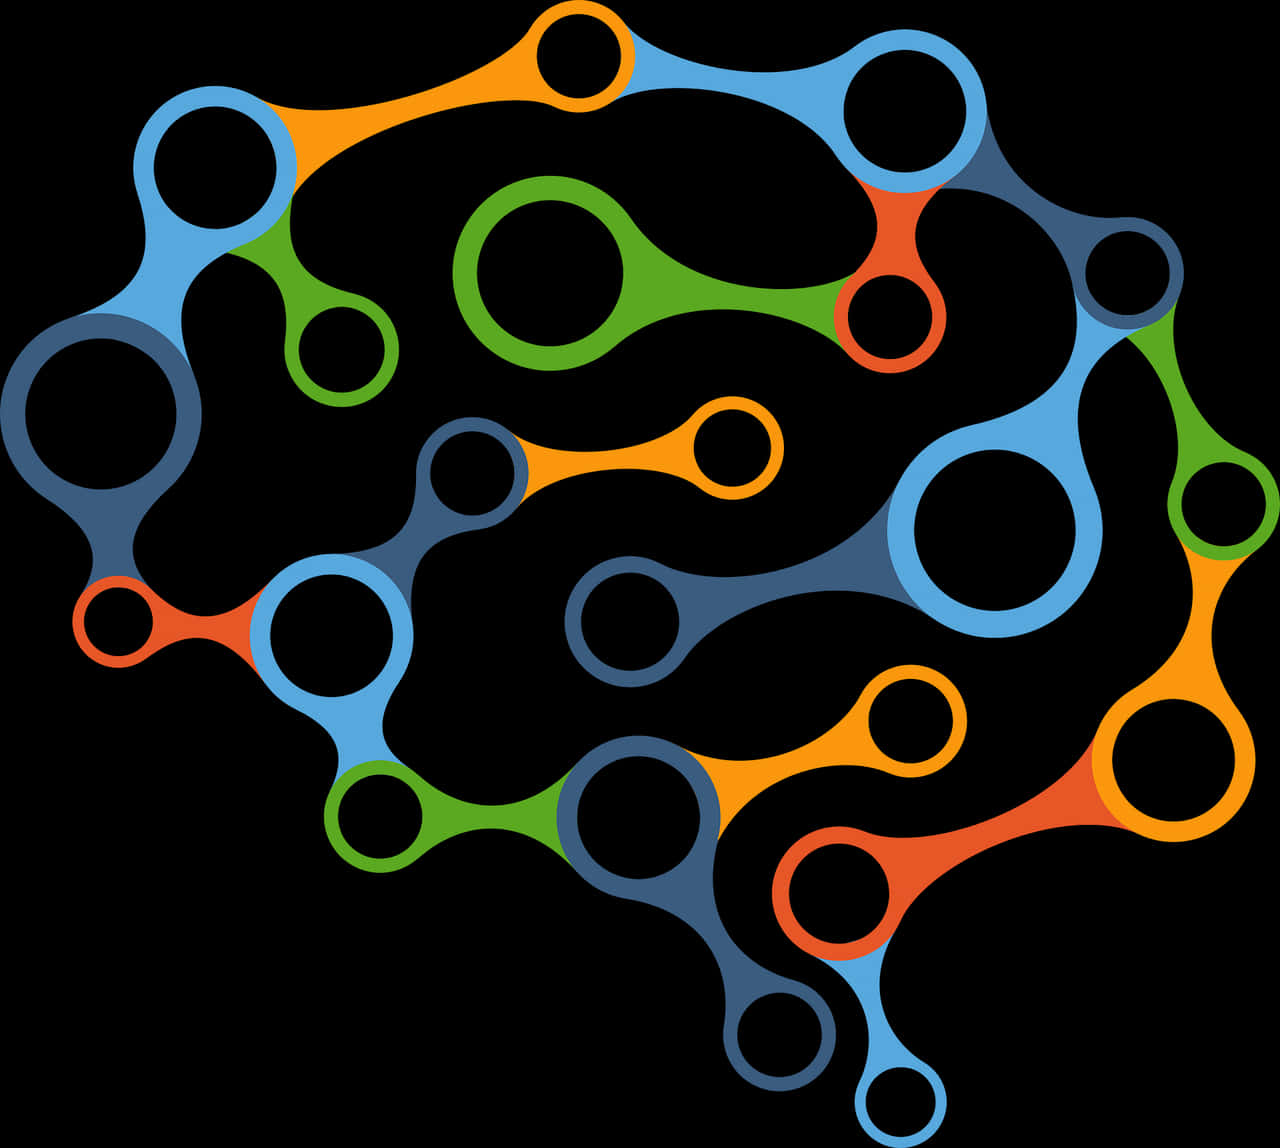 Abstract Neural Network Illustration PNG